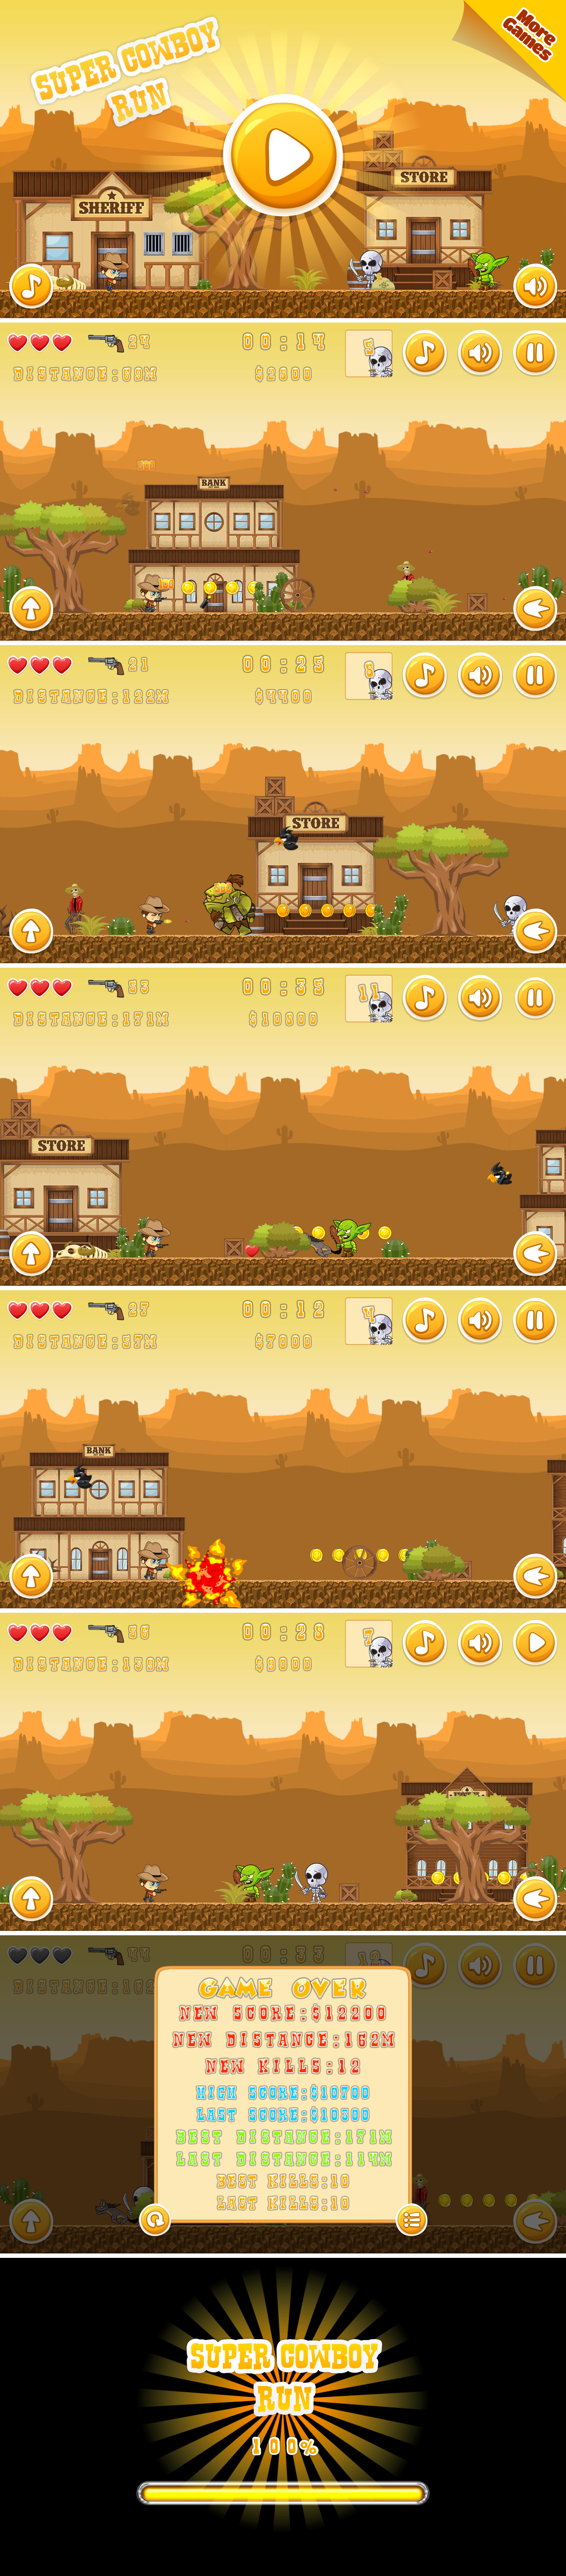 Super Cowboy Run - HTML5 Game, Mobile Version+AdMob!!! (Construct 3 | Construct 2 | Capx) - 1